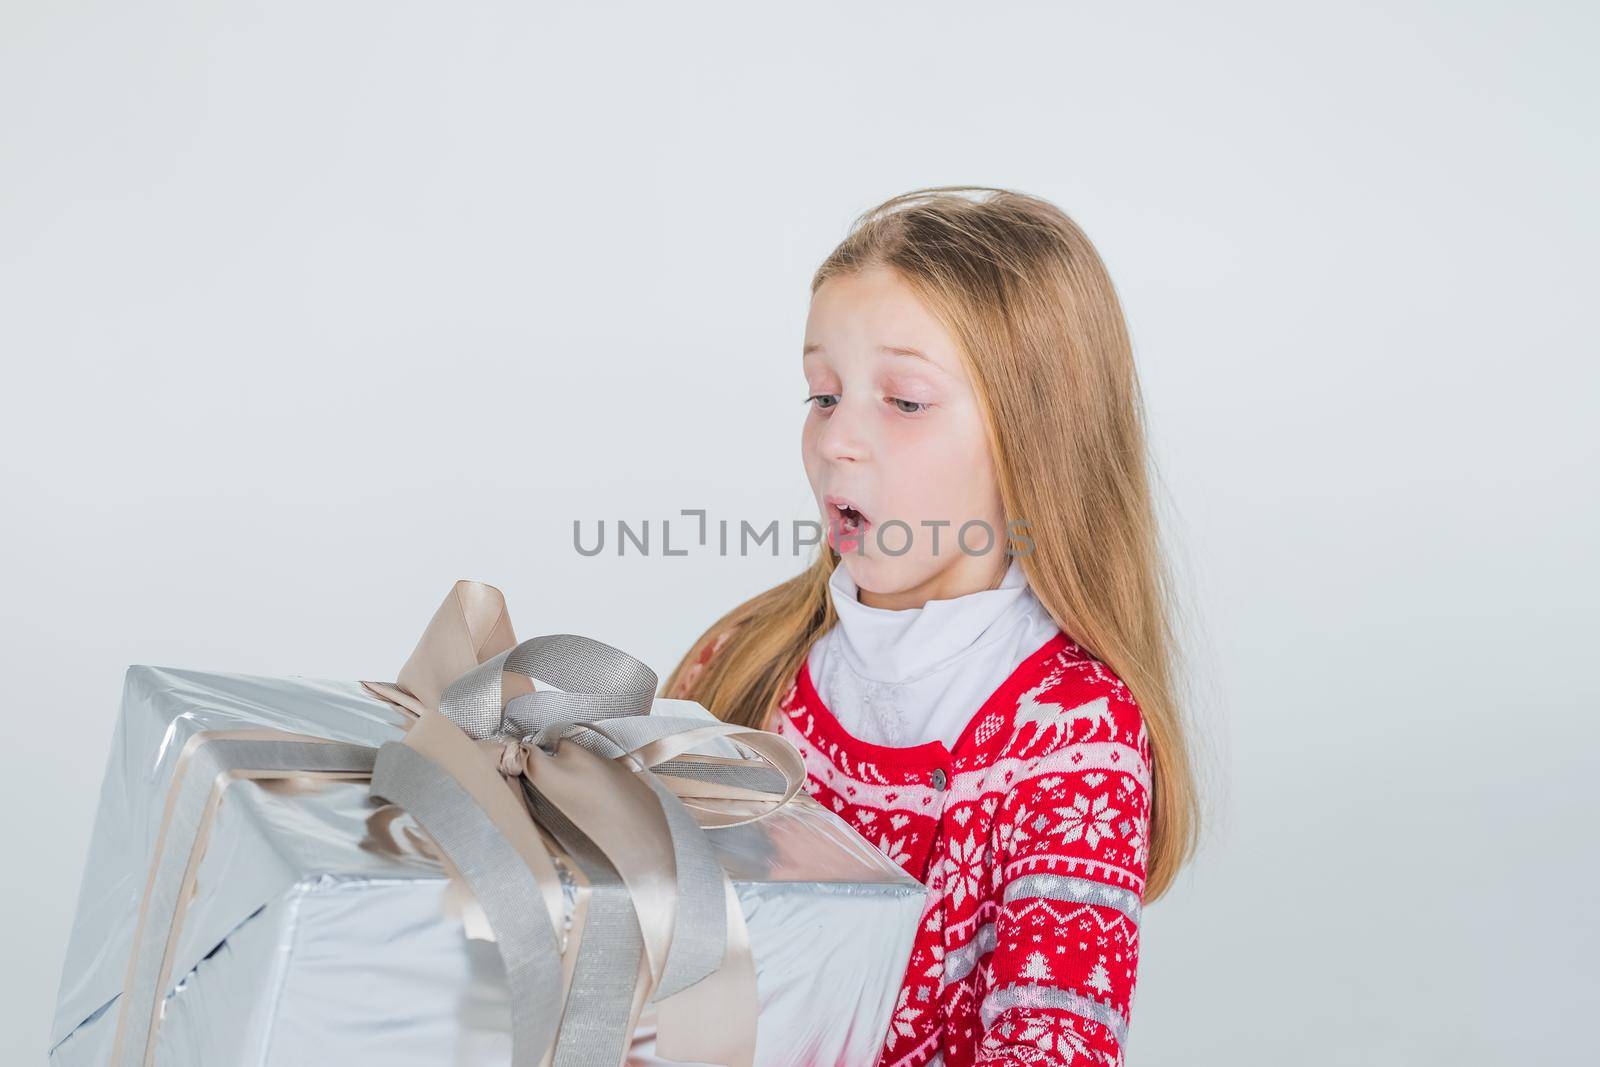 Joyous girl holding gift-wrapped box being excited and surprised to get present on white background.holidays, present, christmas, childhood, happiness concept.Excited surprised young girl in red dress by YuliaYaspe1979